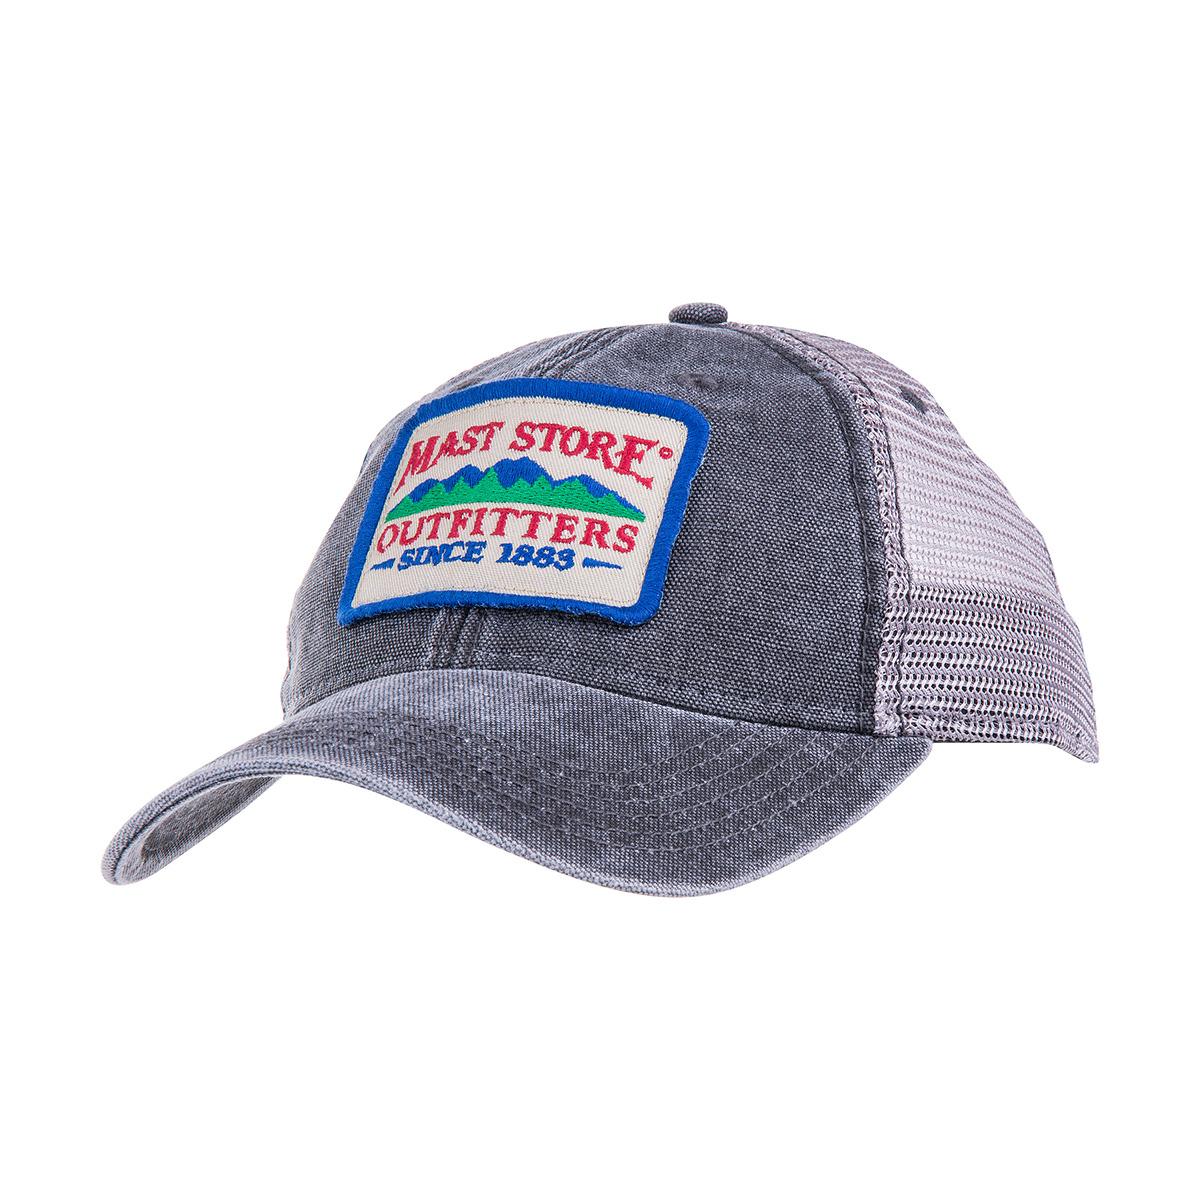  Mast Store Outfitters Logo Dashboard Trucker Hat